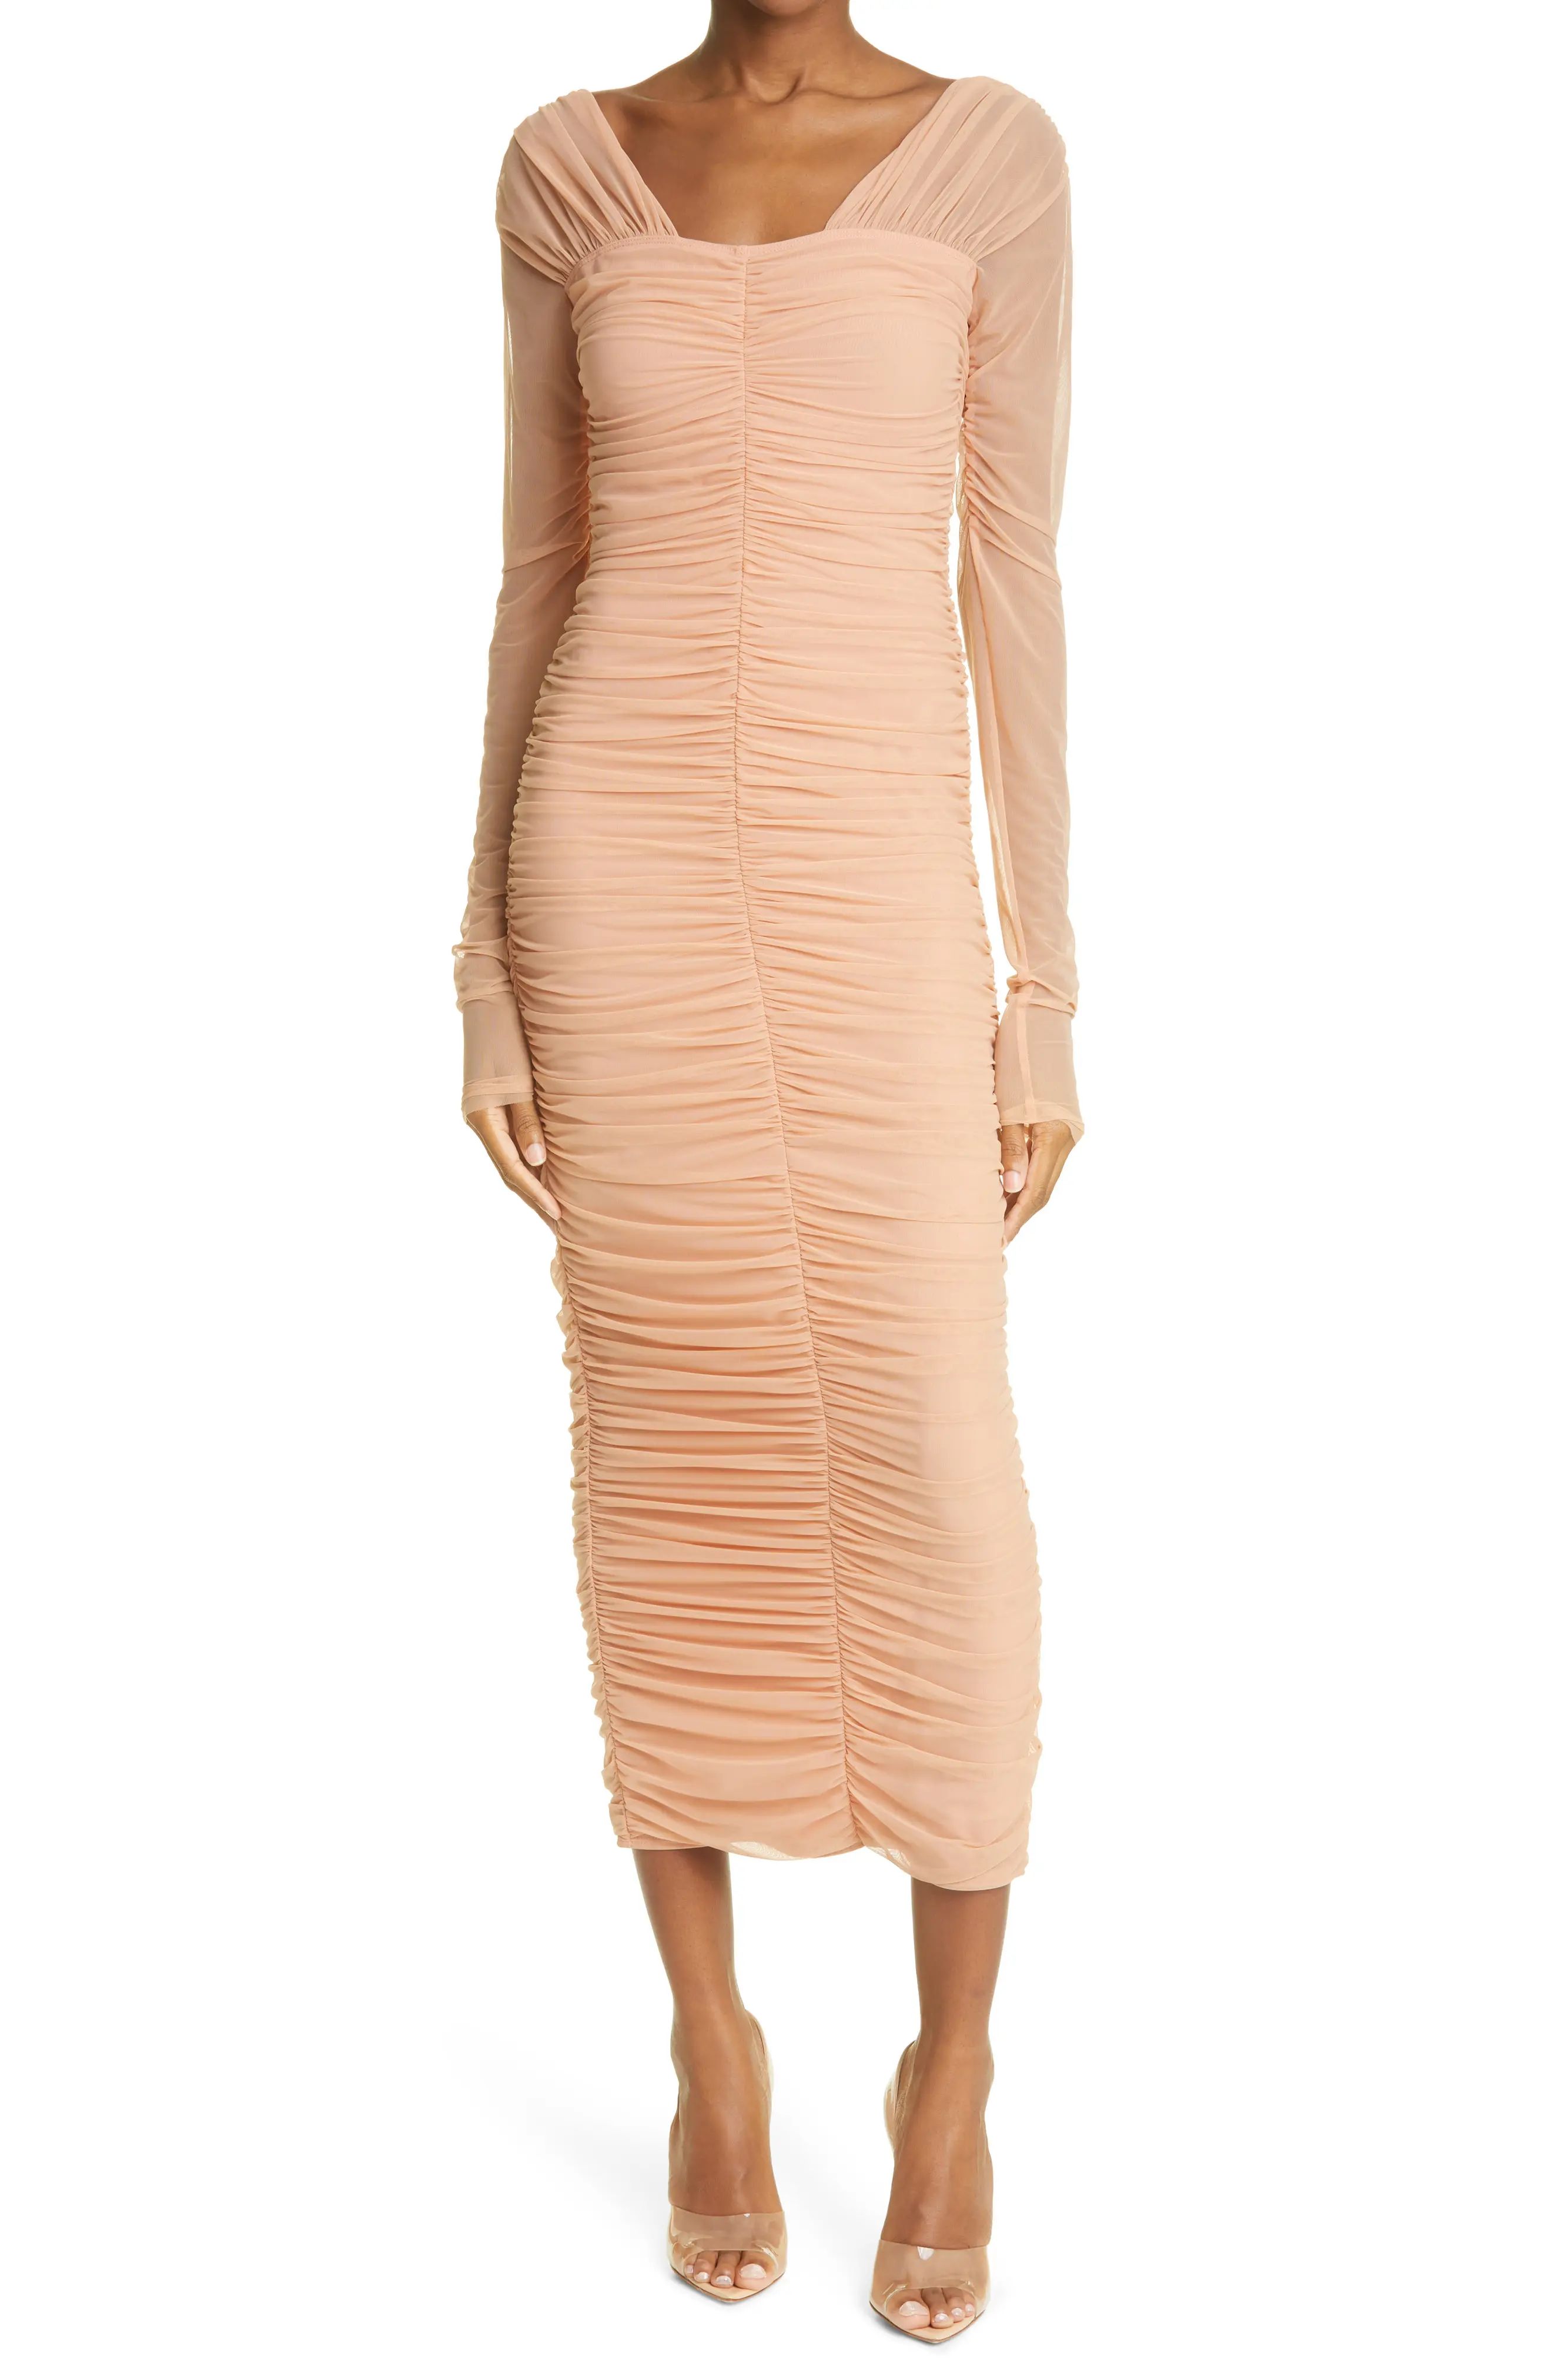 A.L.C. Jackie Long Sleeve Ruched Dress in Dusty Coral at Nordstrom, Size X-Small | Nordstrom